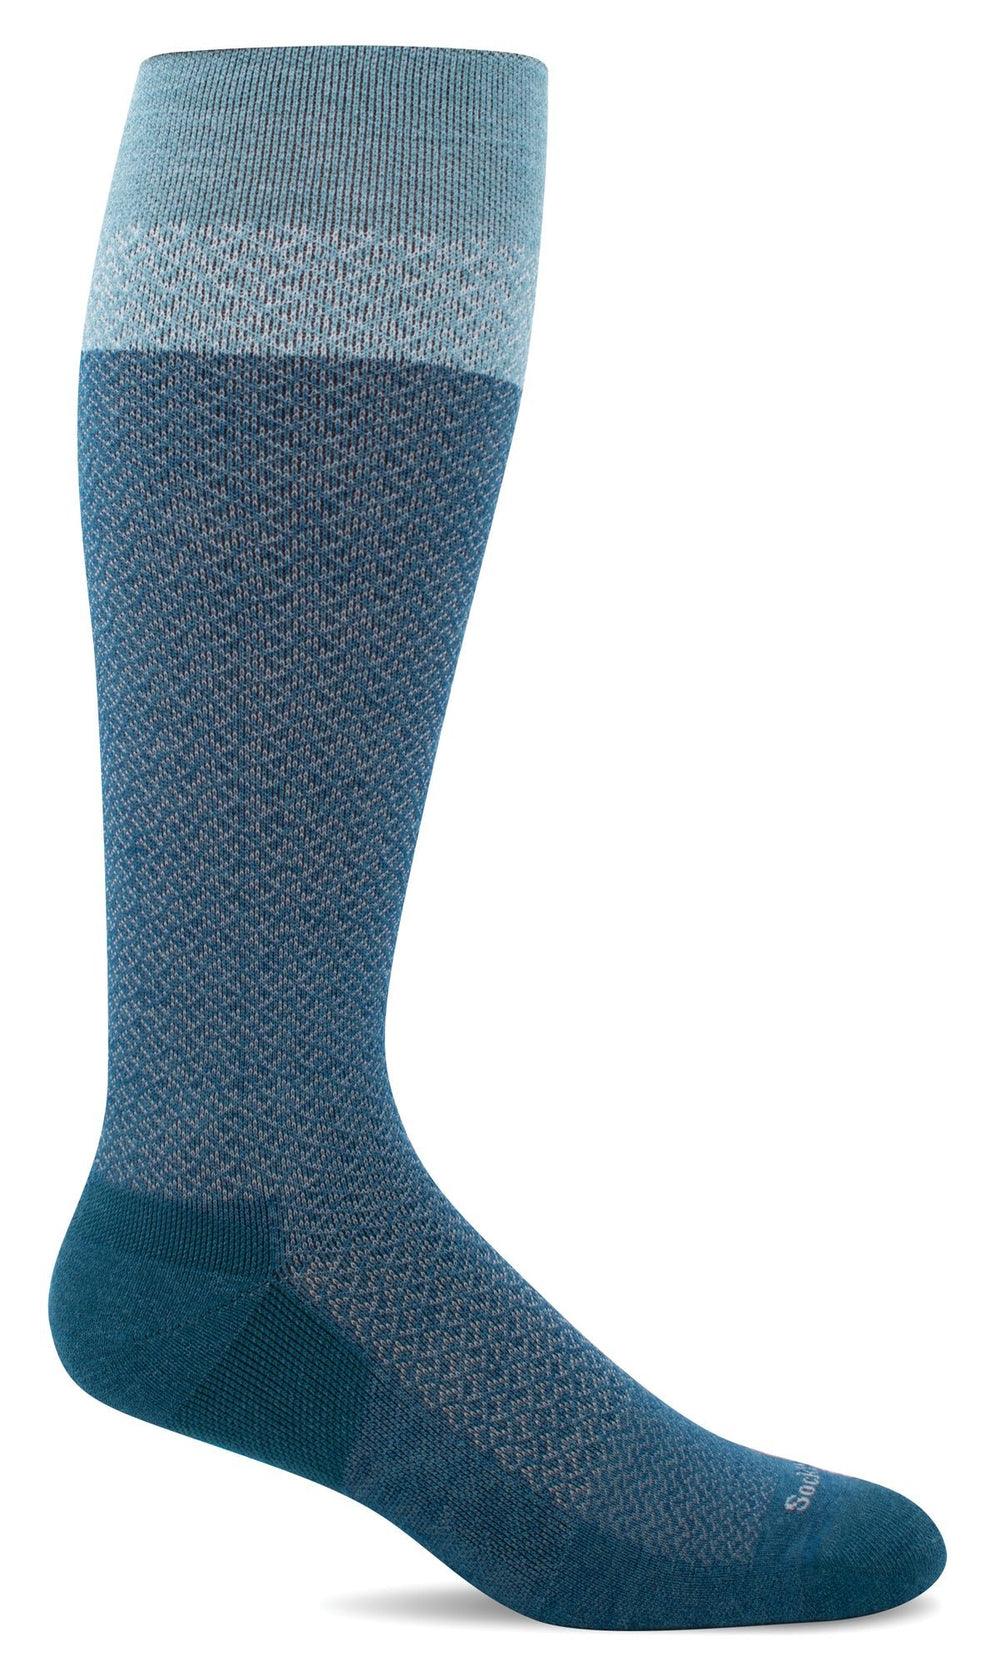 Full Twist | Wide Calf Fit | Moderate Knee-high Compression - Sockwell - The Sock Monster